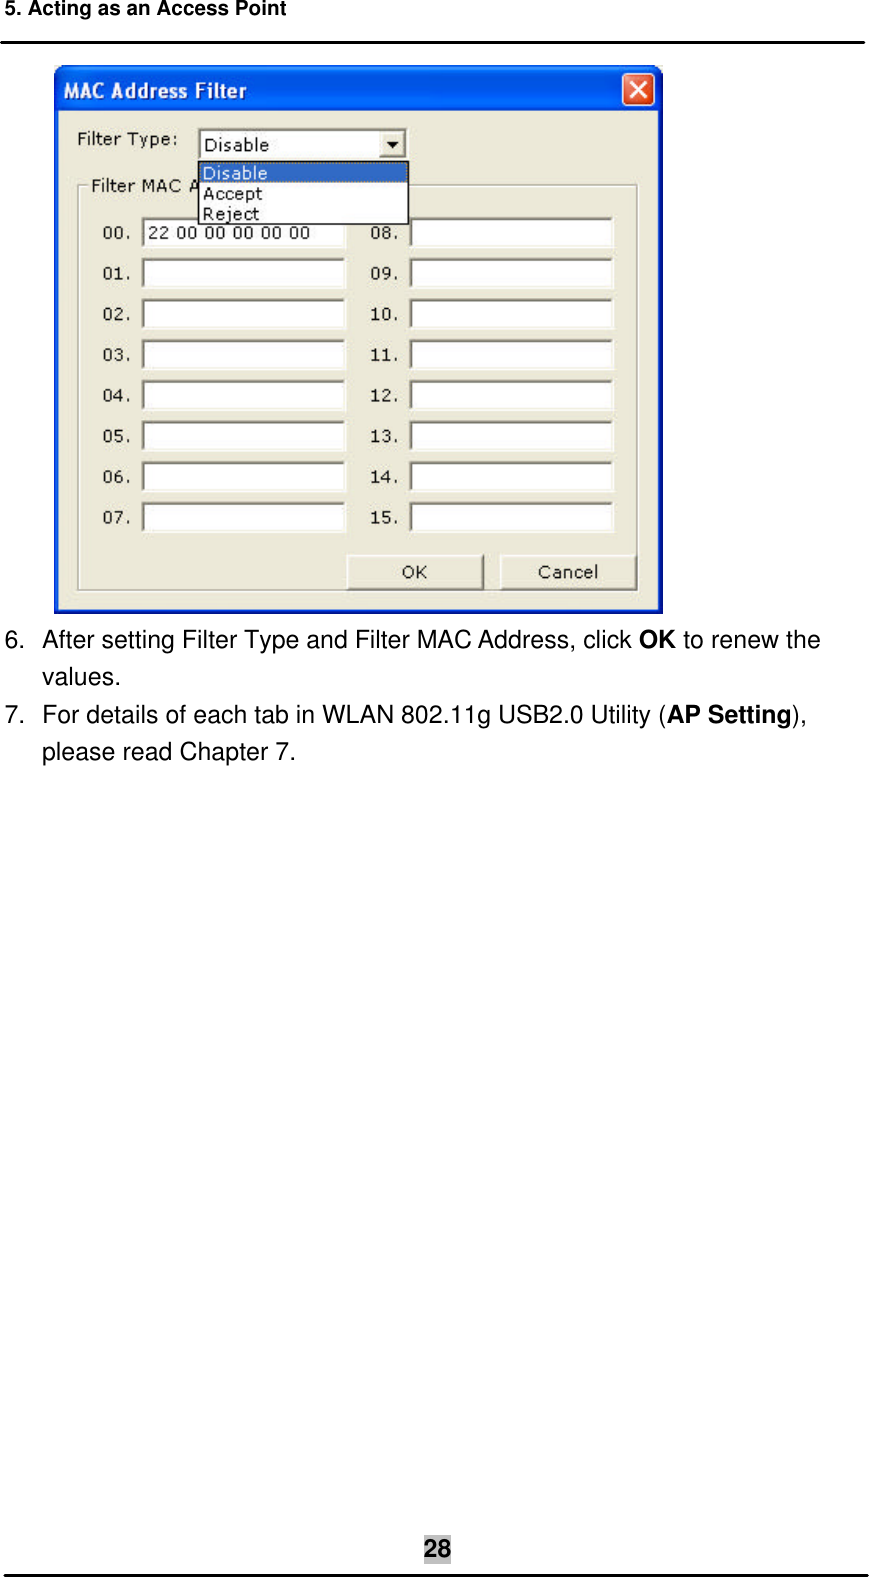 5. Acting as an Access Point  28 6. After setting Filter Type and Filter MAC Address, click OK to renew the values. 7. For details of each tab in WLAN 802.11g USB2.0 Utility (AP Setting), please read Chapter 7.  